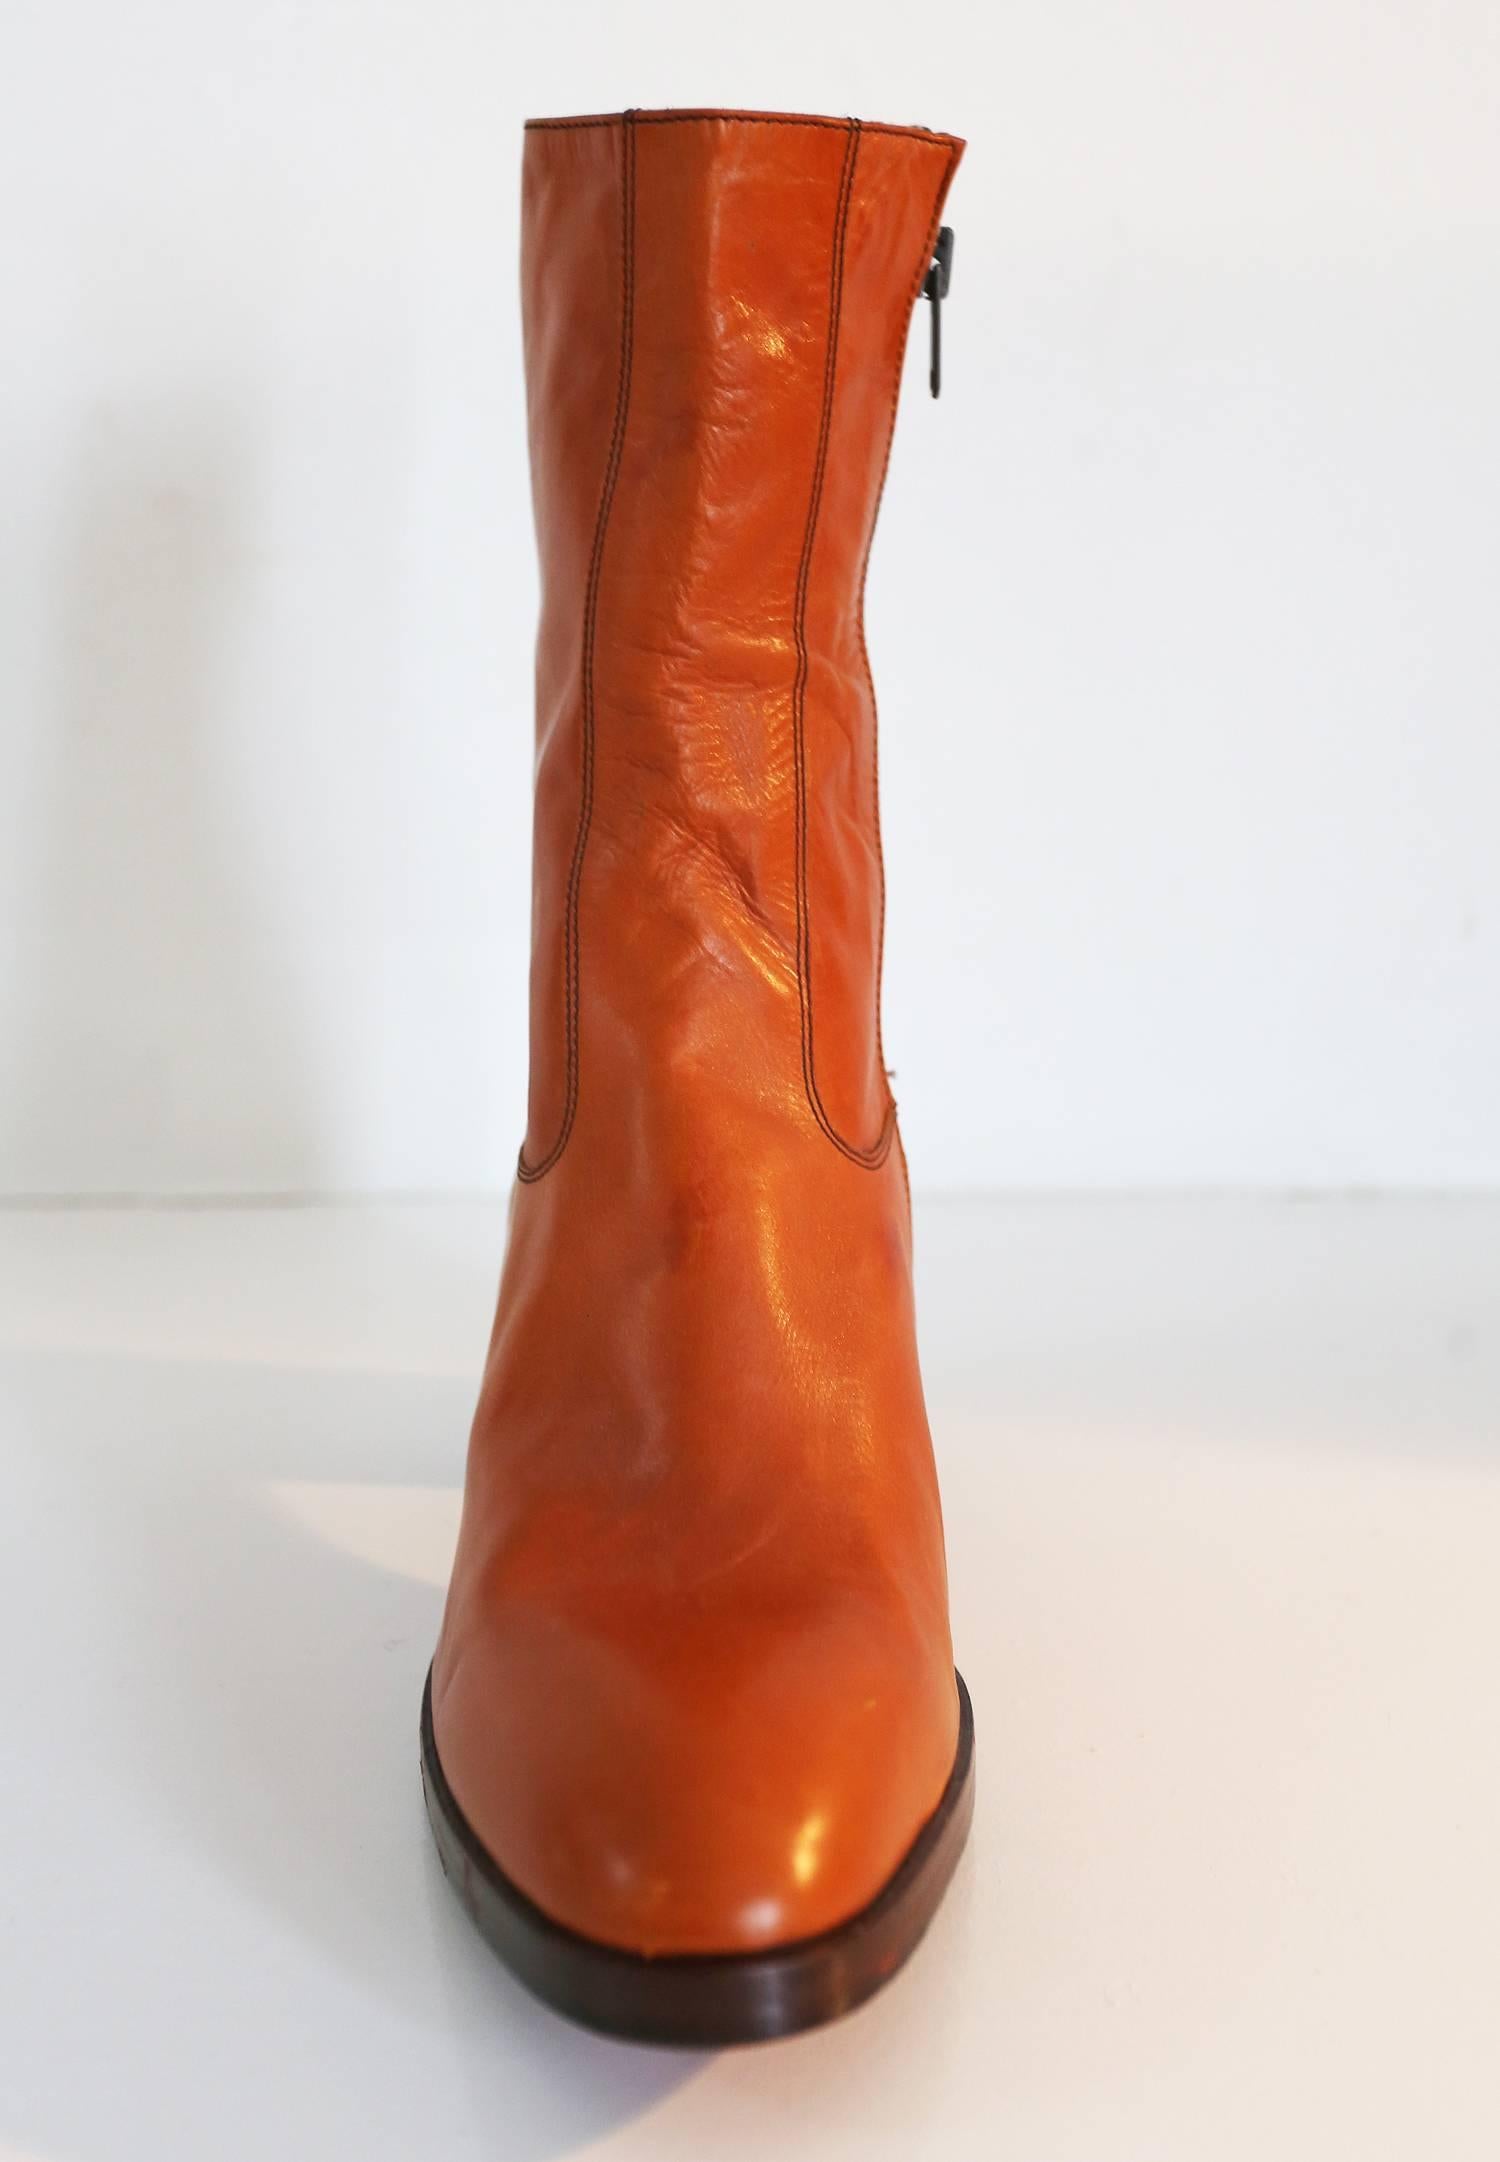 Original 1970s mens platform boots by Jocelyn. The boots are in orange high quality Italian leather and feature a round toe, wooden platform, red sole and side zipper. 

EU 43 

